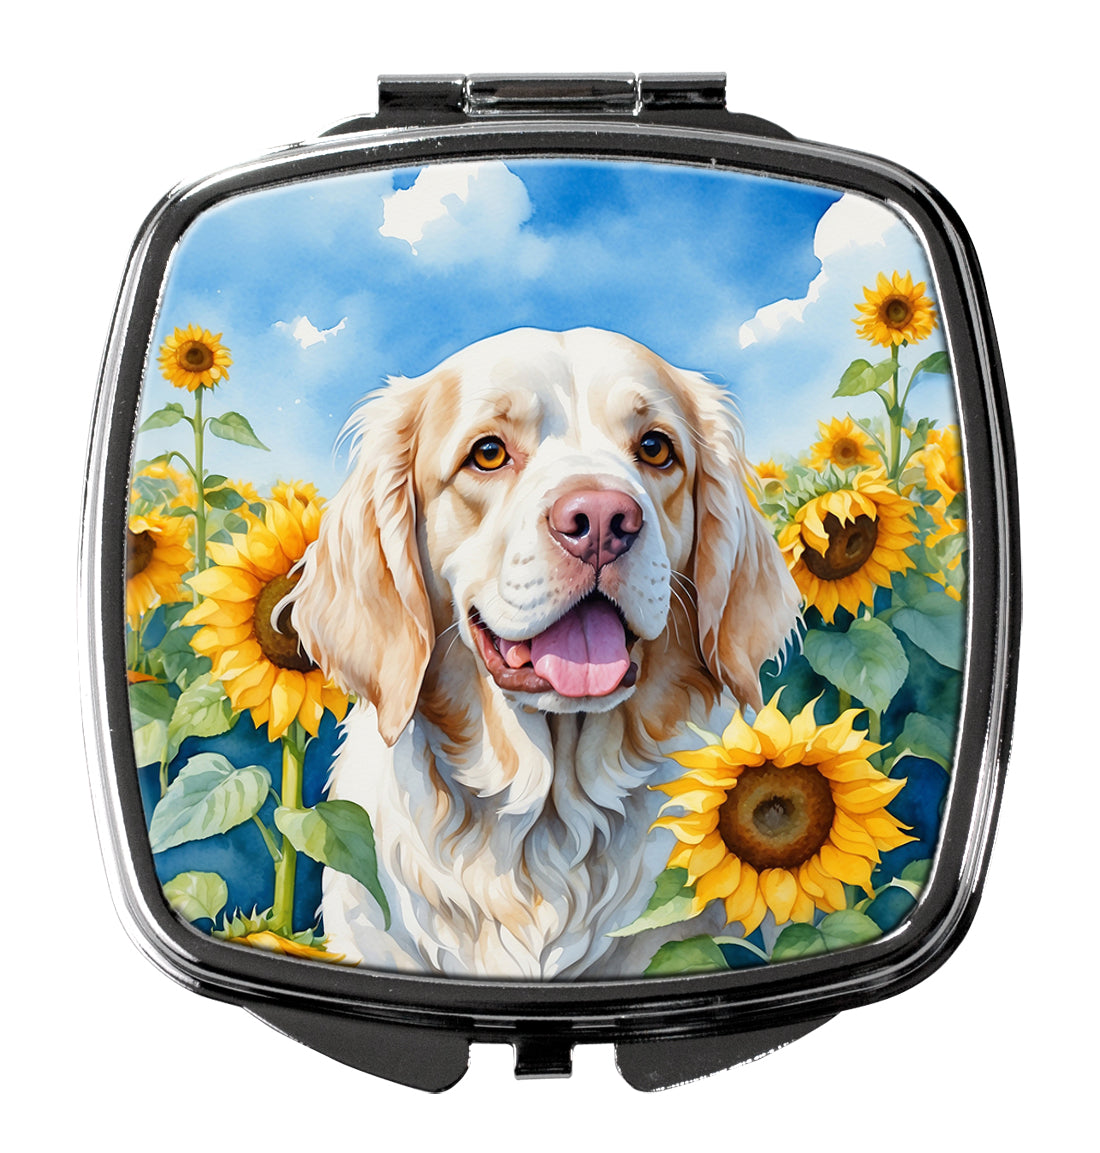 Buy this Clumber Spaniel in Sunflowers Compact Mirror